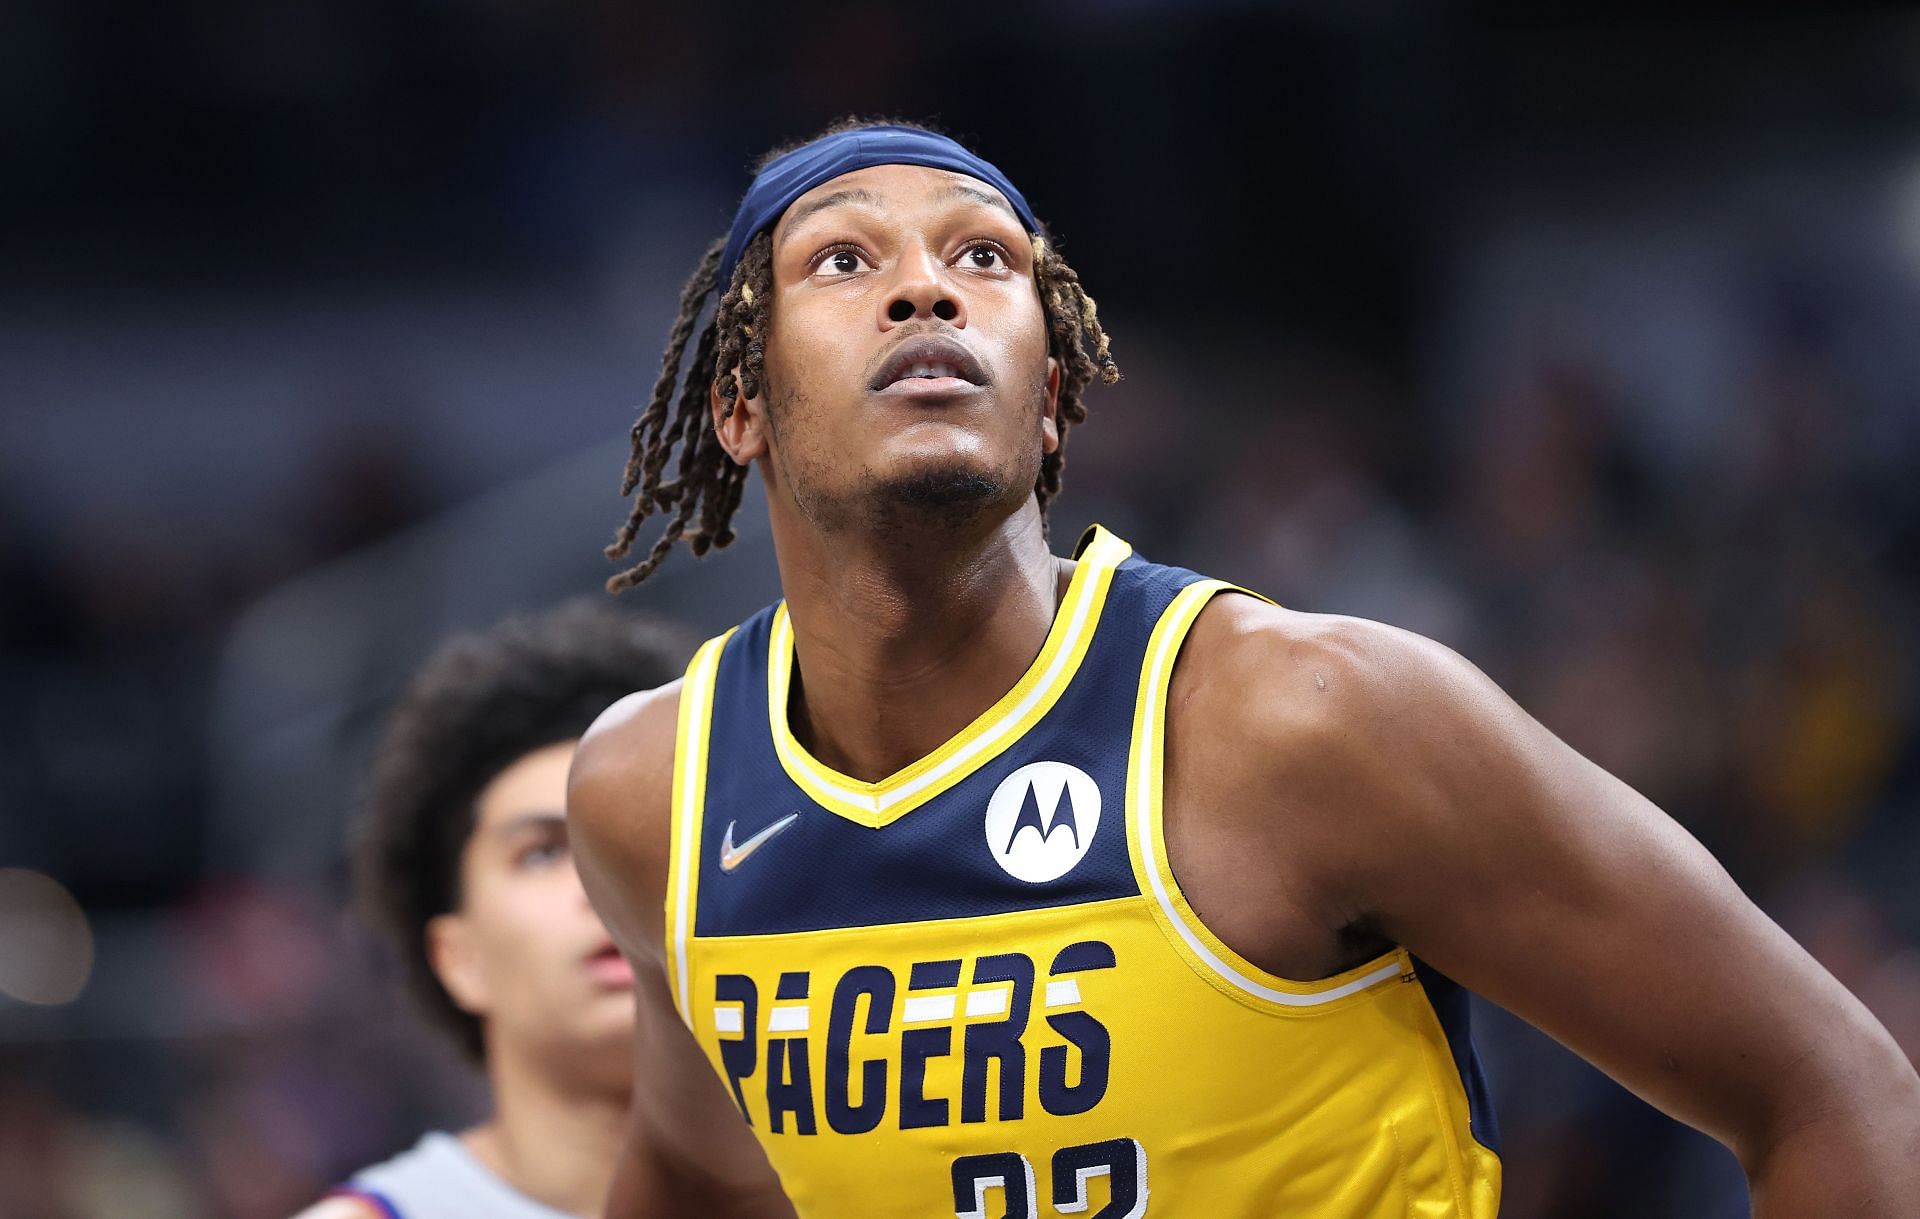 Indiana Pacers talisman Myles Turner in action.